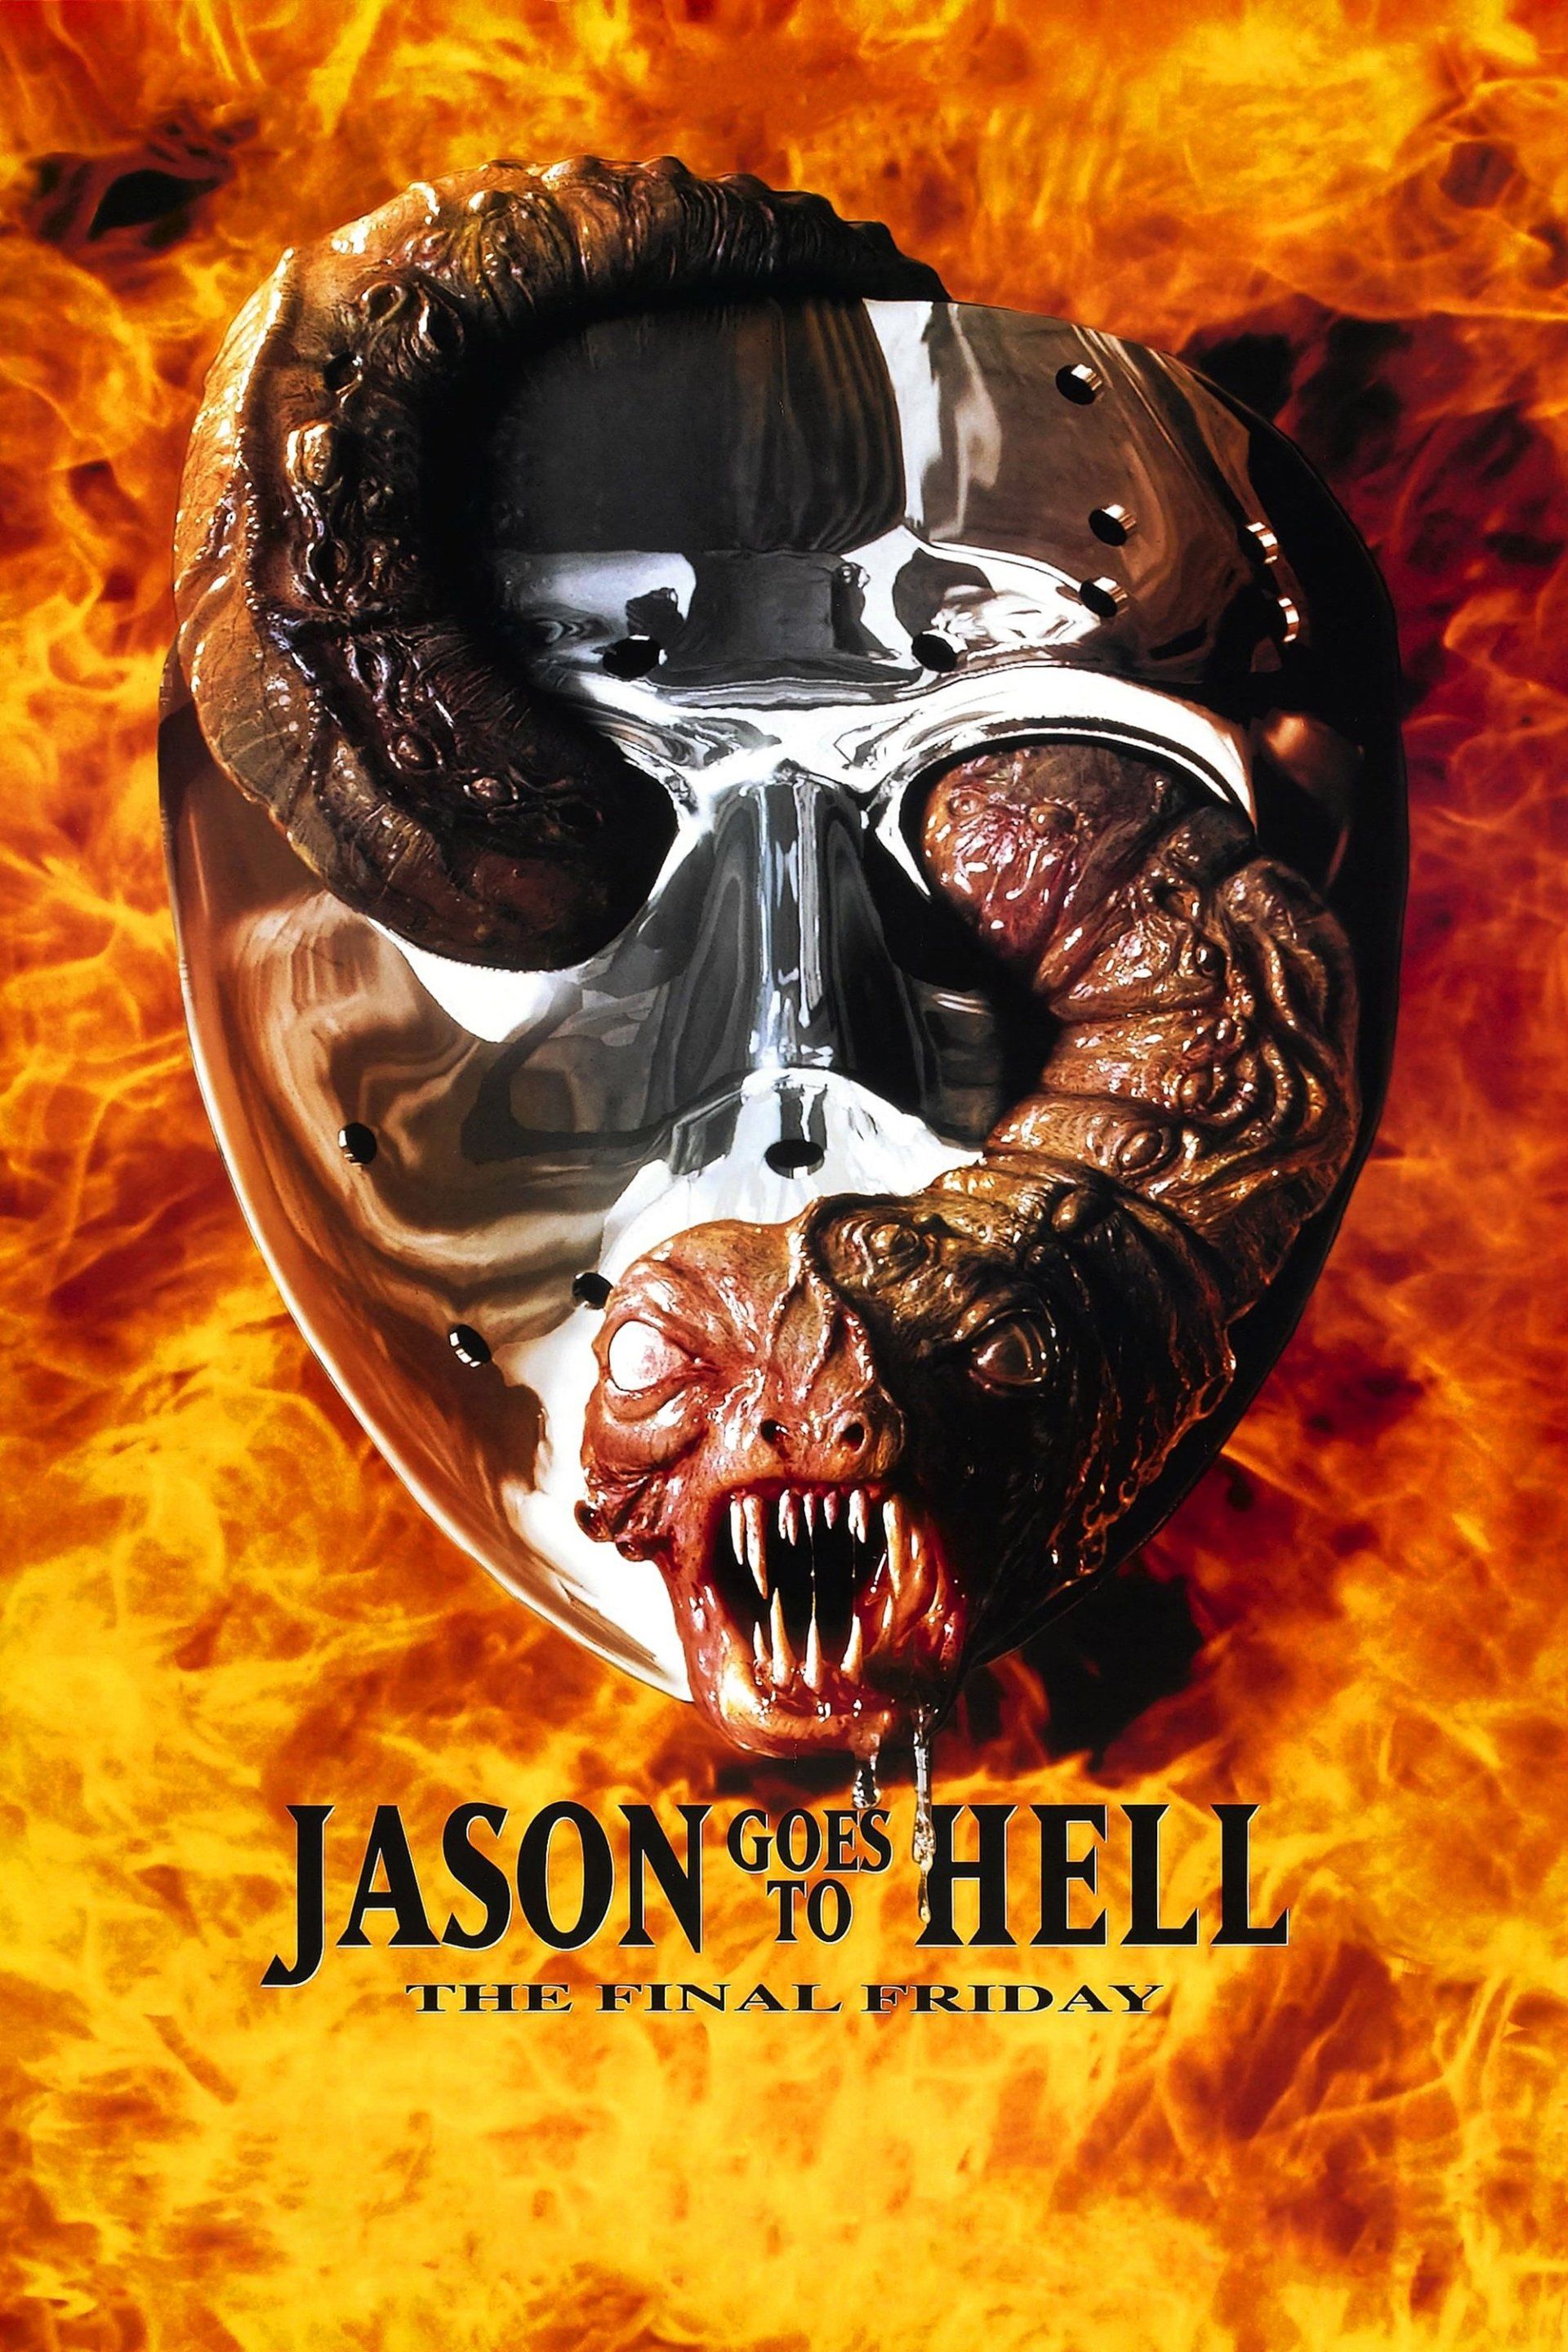 Jason-goes-to-hell-poster 